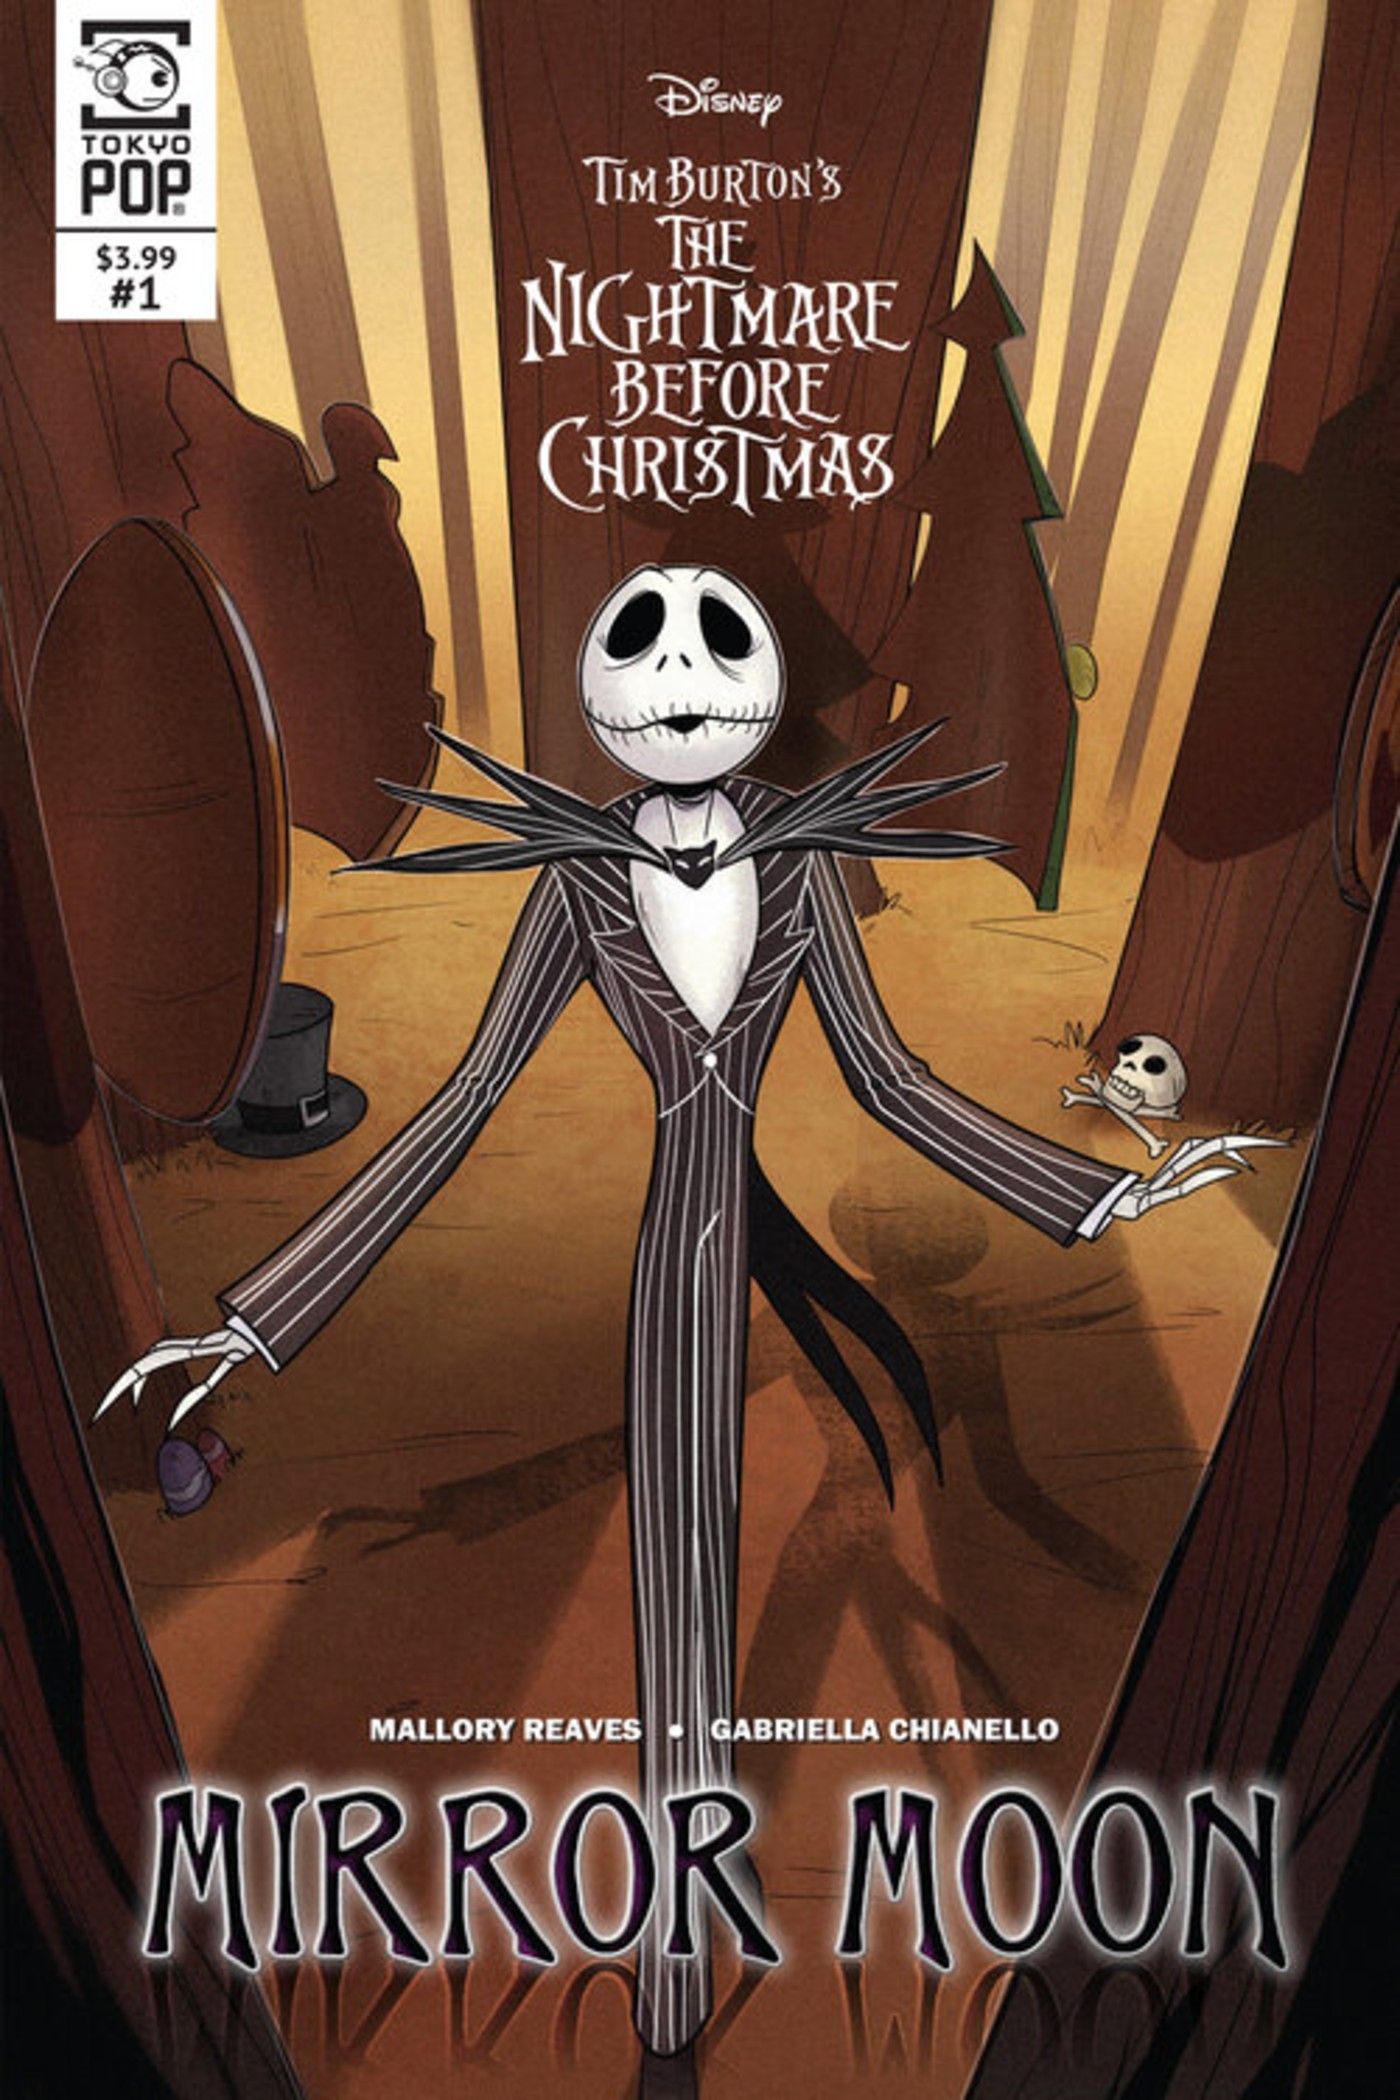 Nightmare Before Christmas Gets A Sequel in New Disney Manga